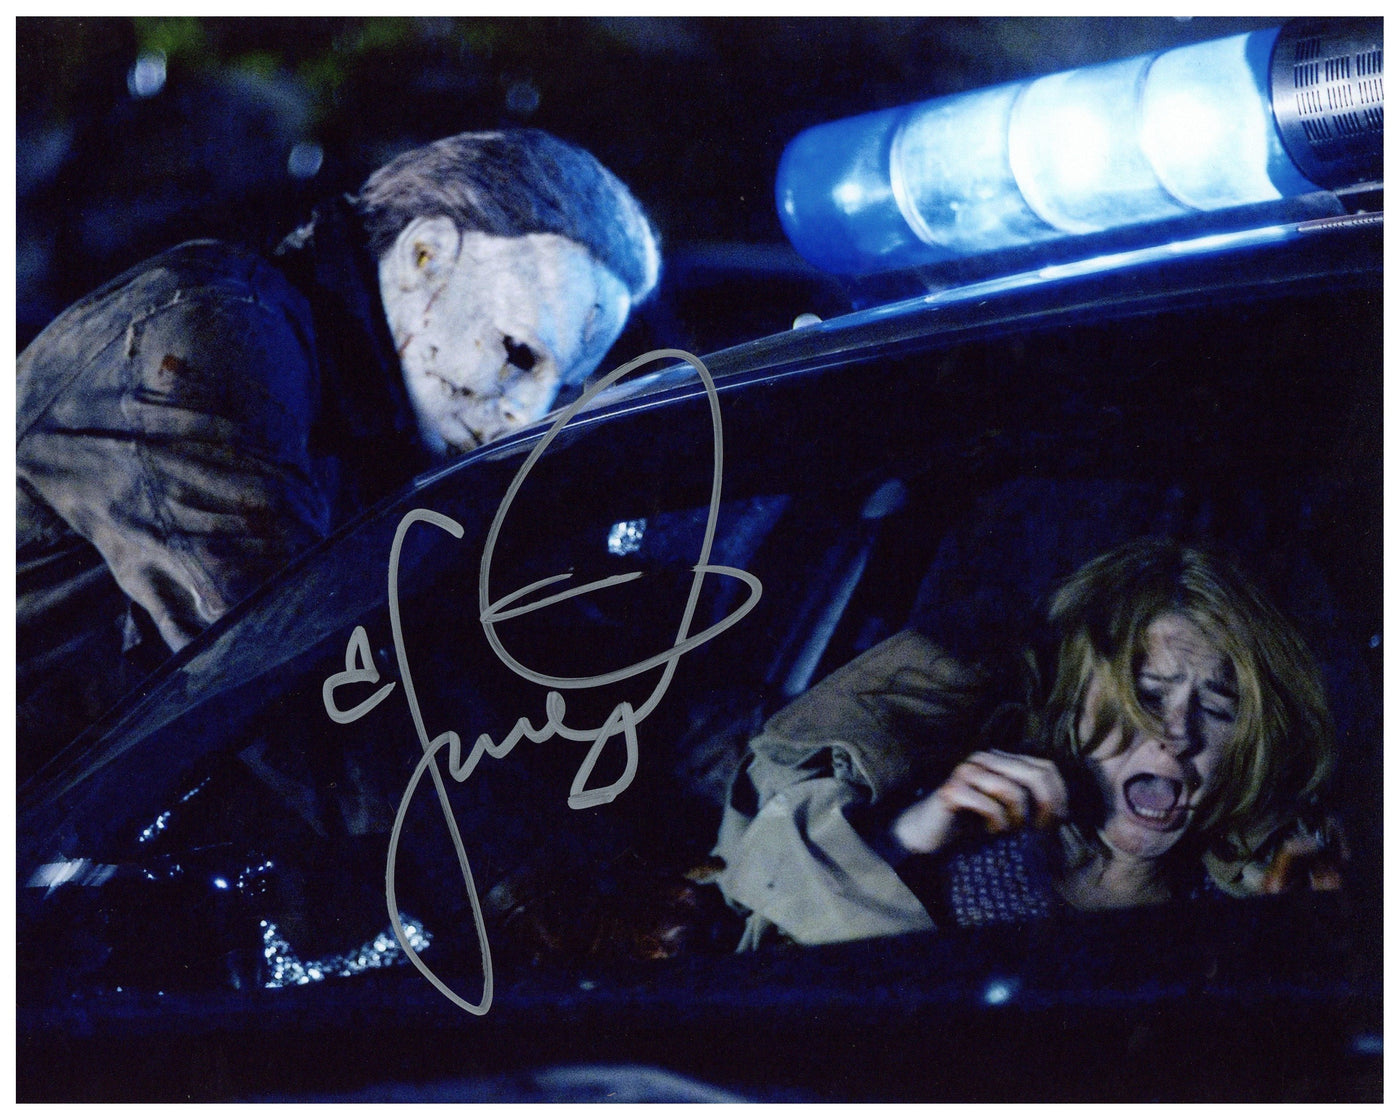 Scout Taylor-Compton Signed 8x10 Photo Halloween Rob Zombie Autographed JSA COA 5